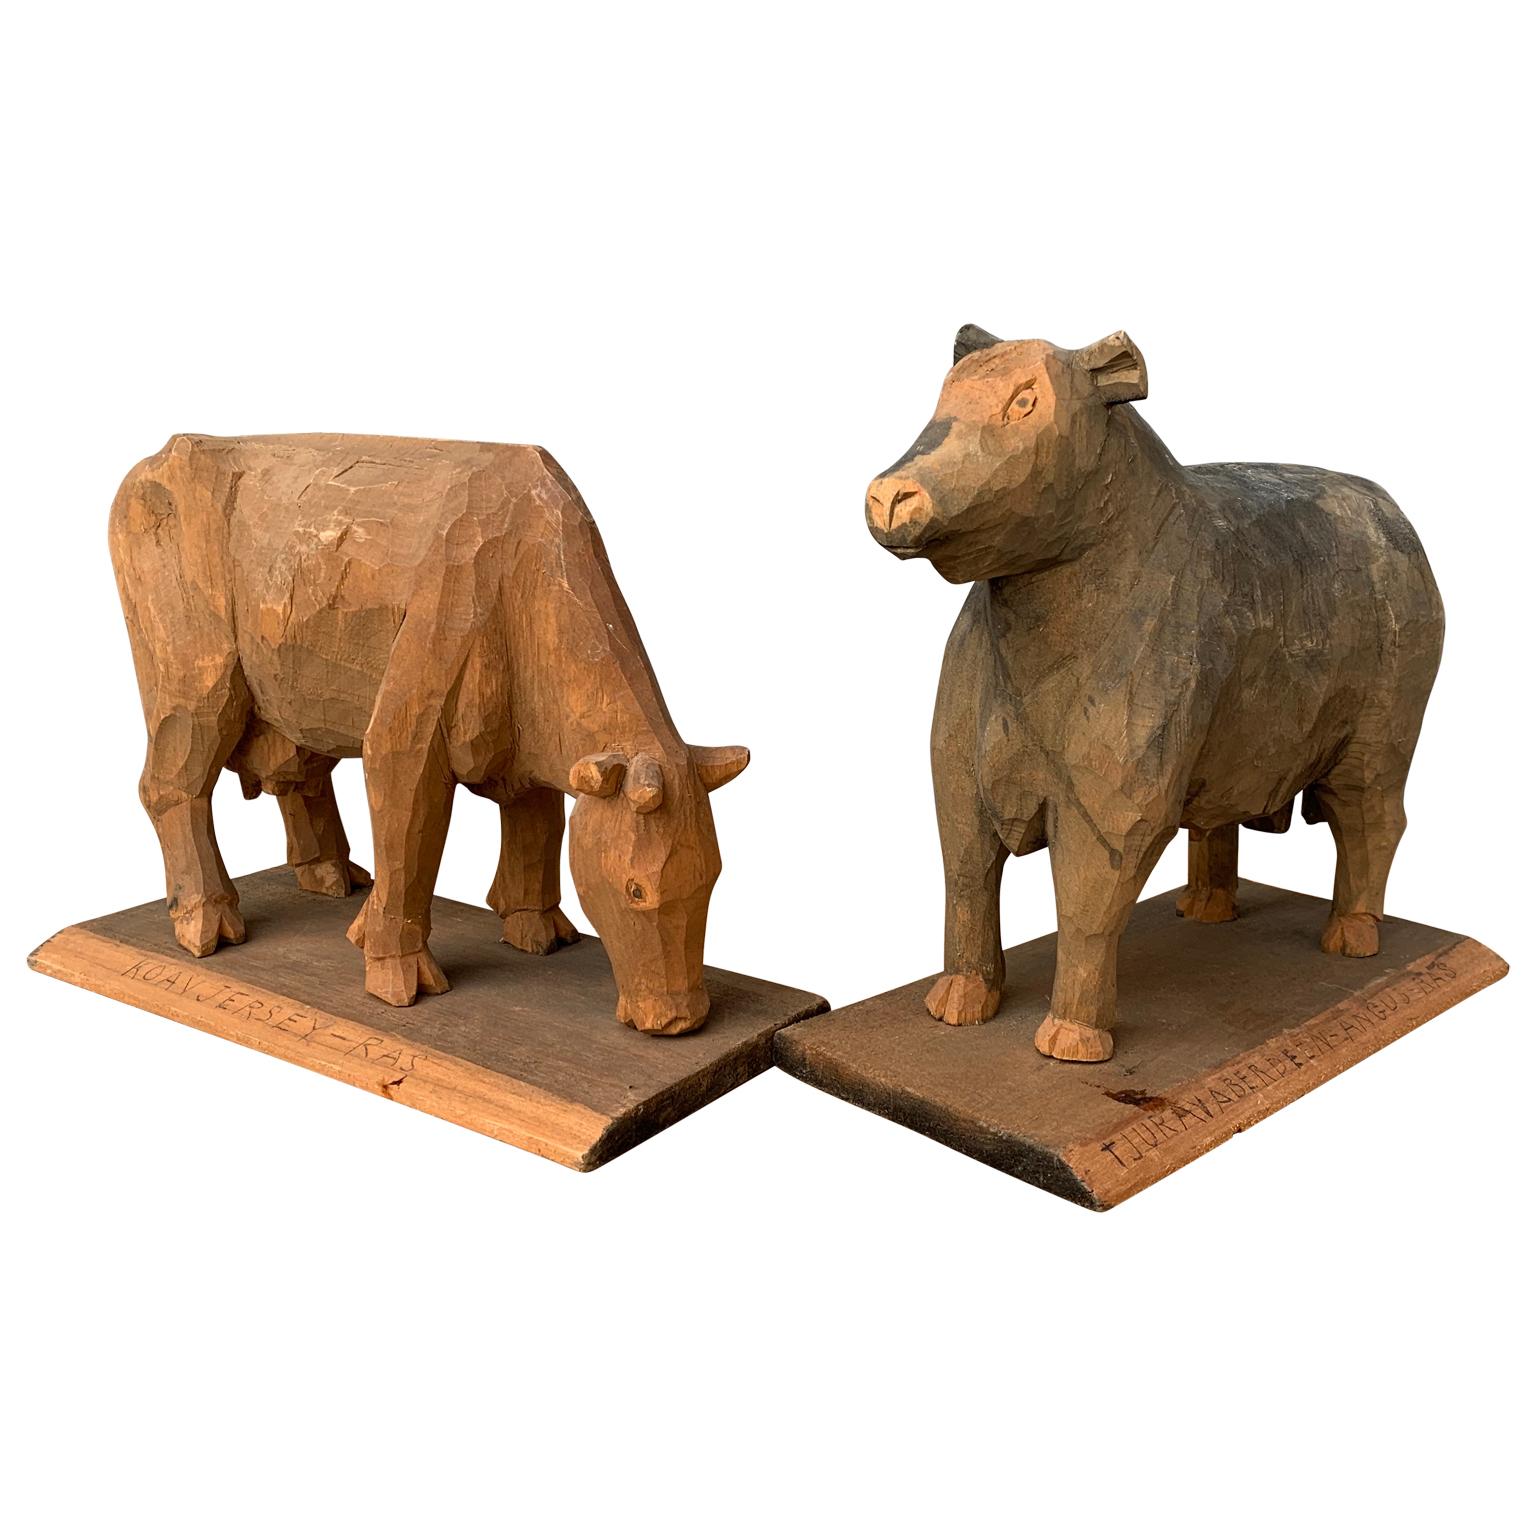 A Swedish pair of wooden carved figures, the cow of the 